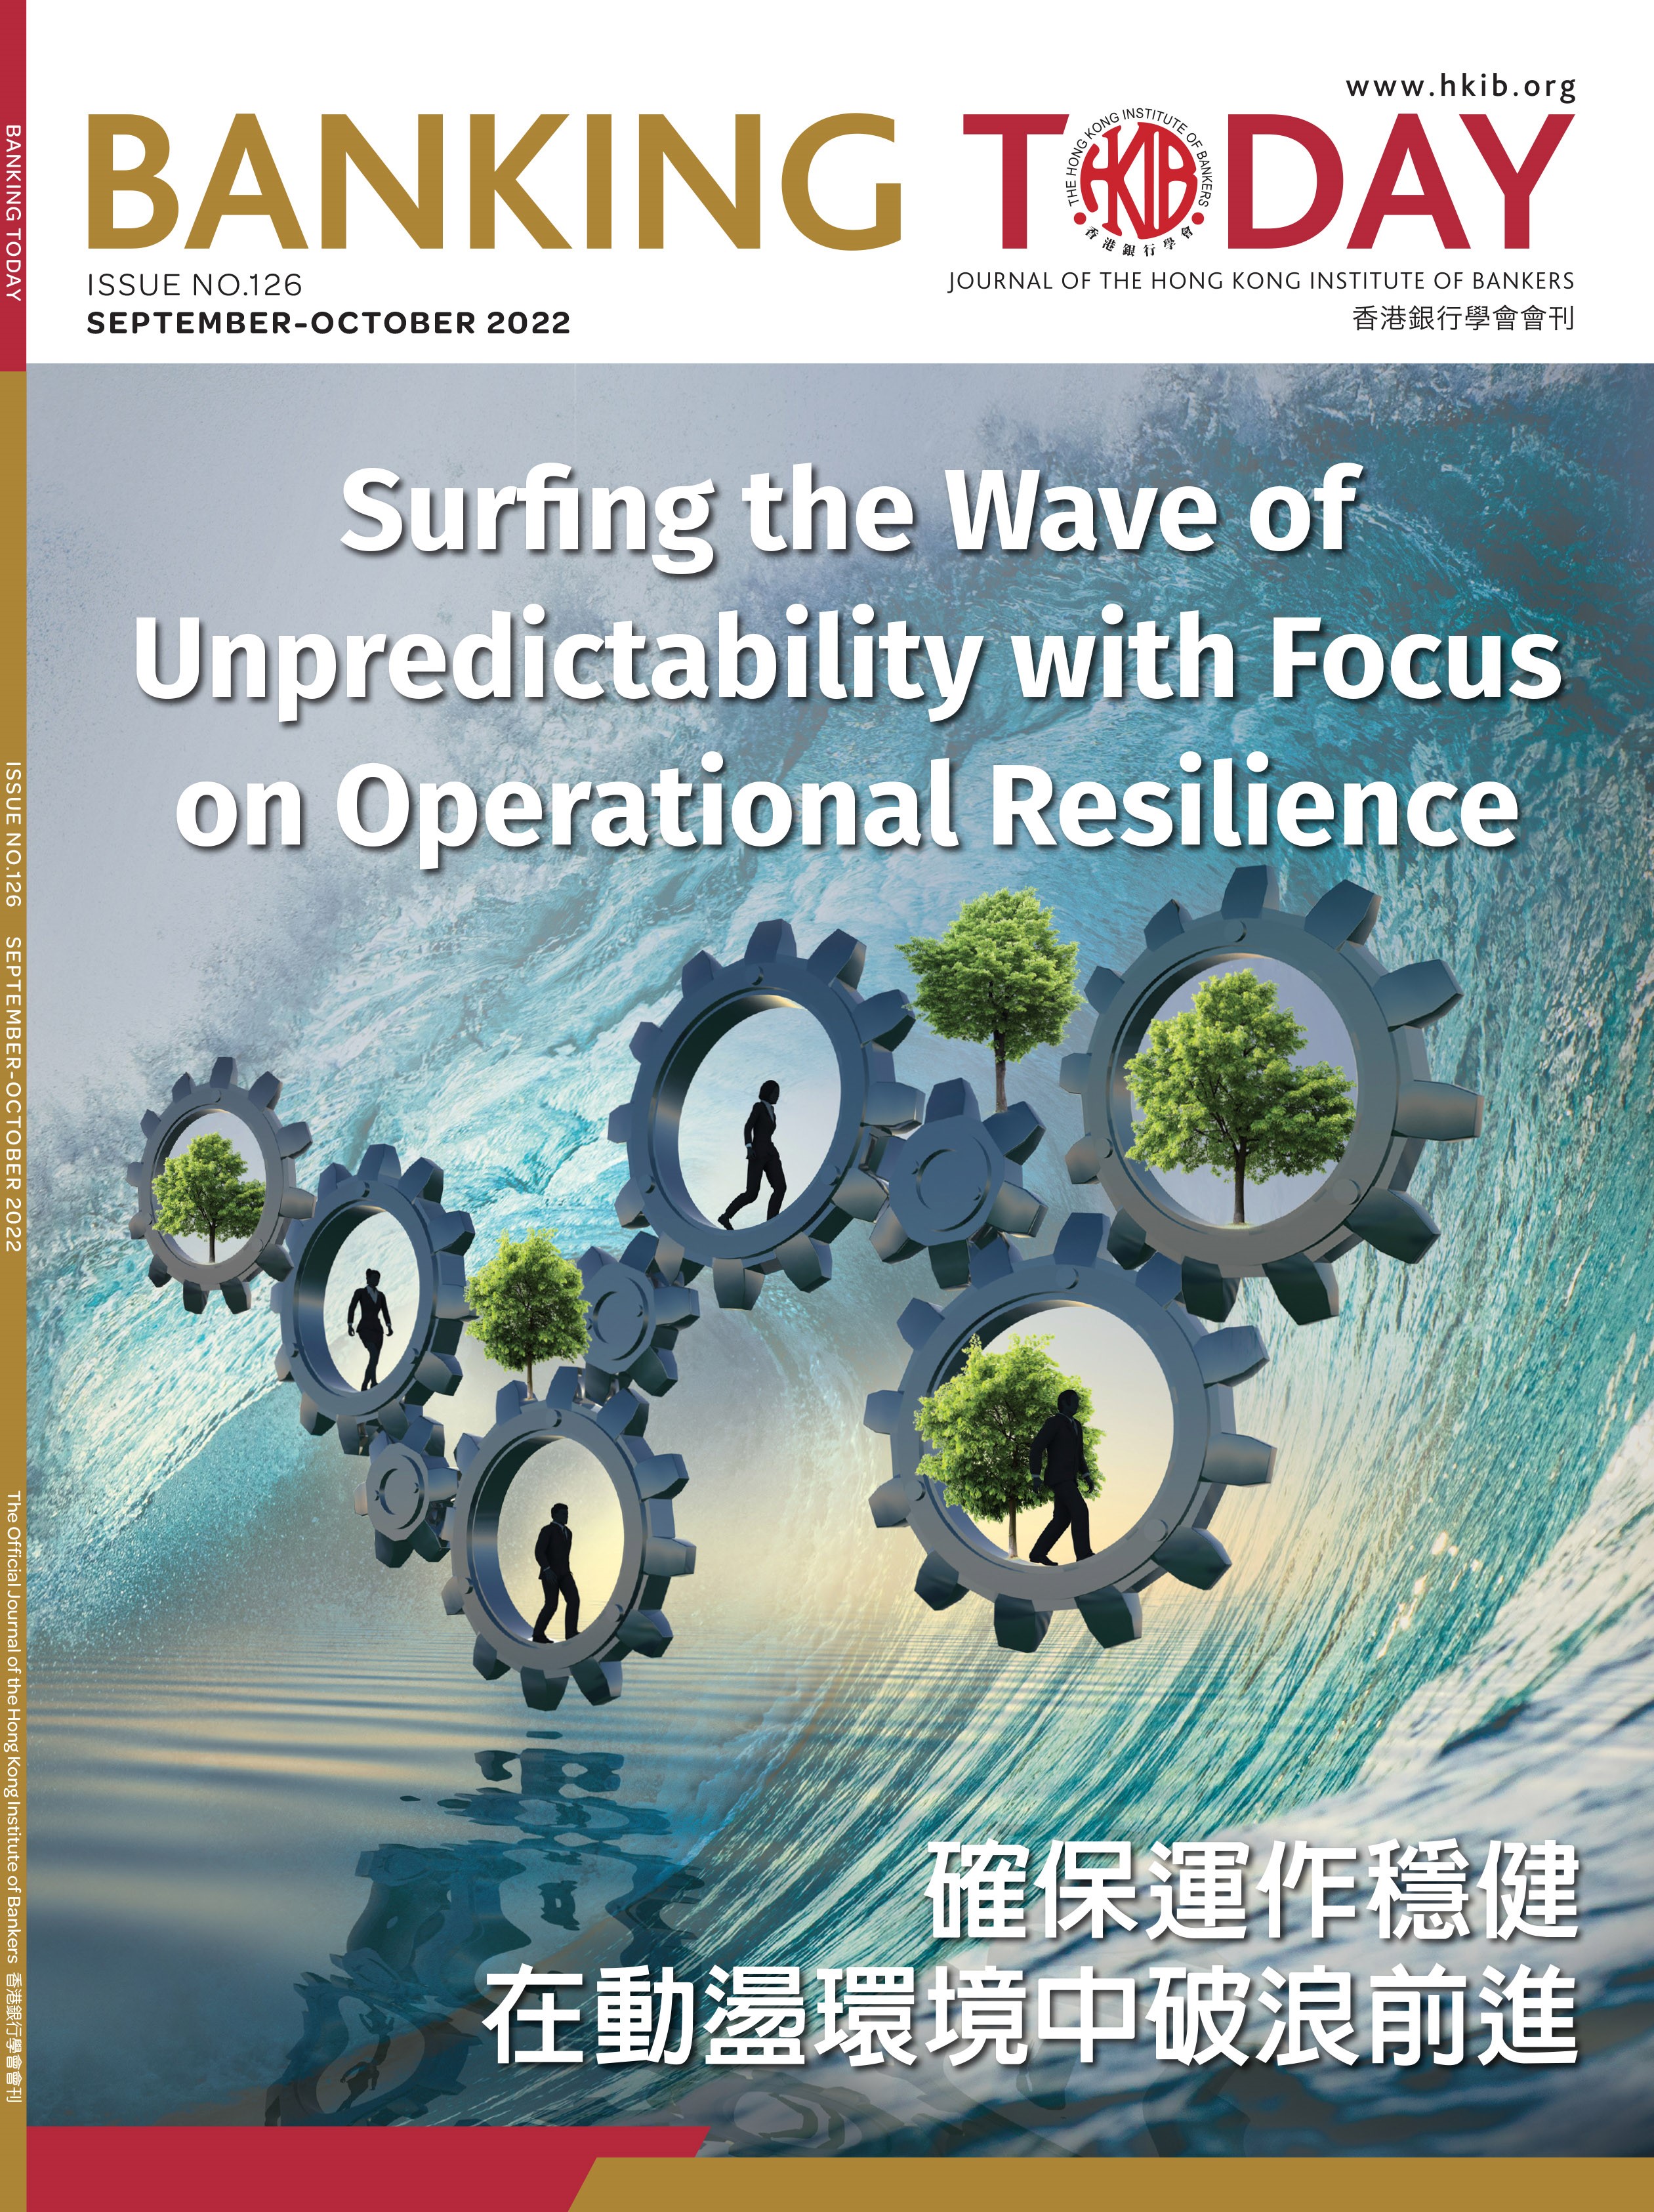 Surfing the Wave of Unpredictability with Focus on Operational Resilience